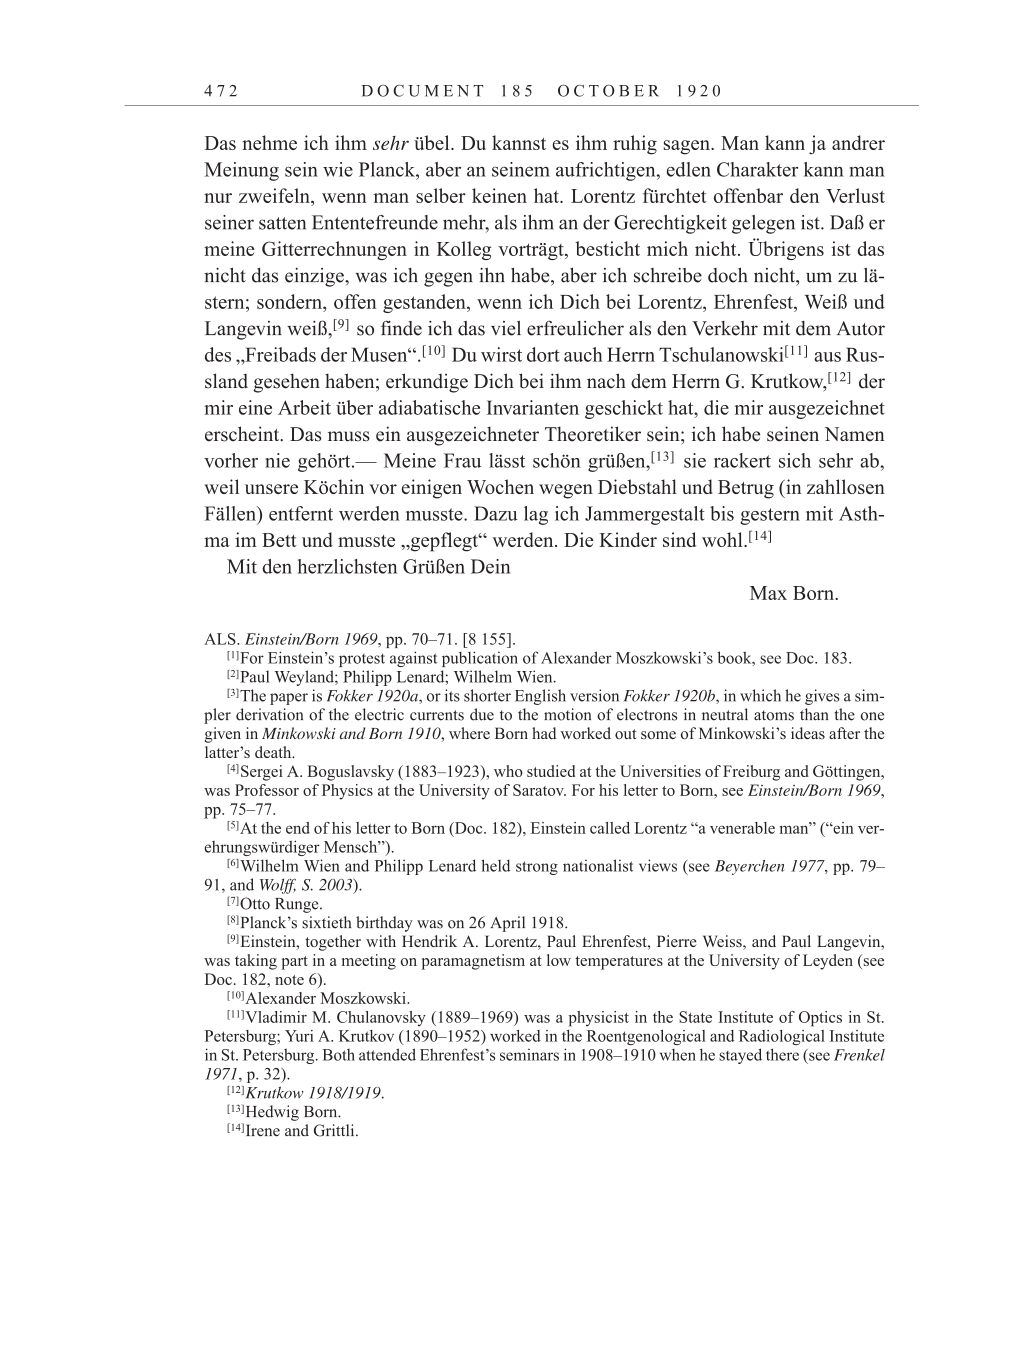 Volume 10: The Berlin Years: Correspondence May-December 1920 / Supplementary Correspondence 1909-1920 page 472